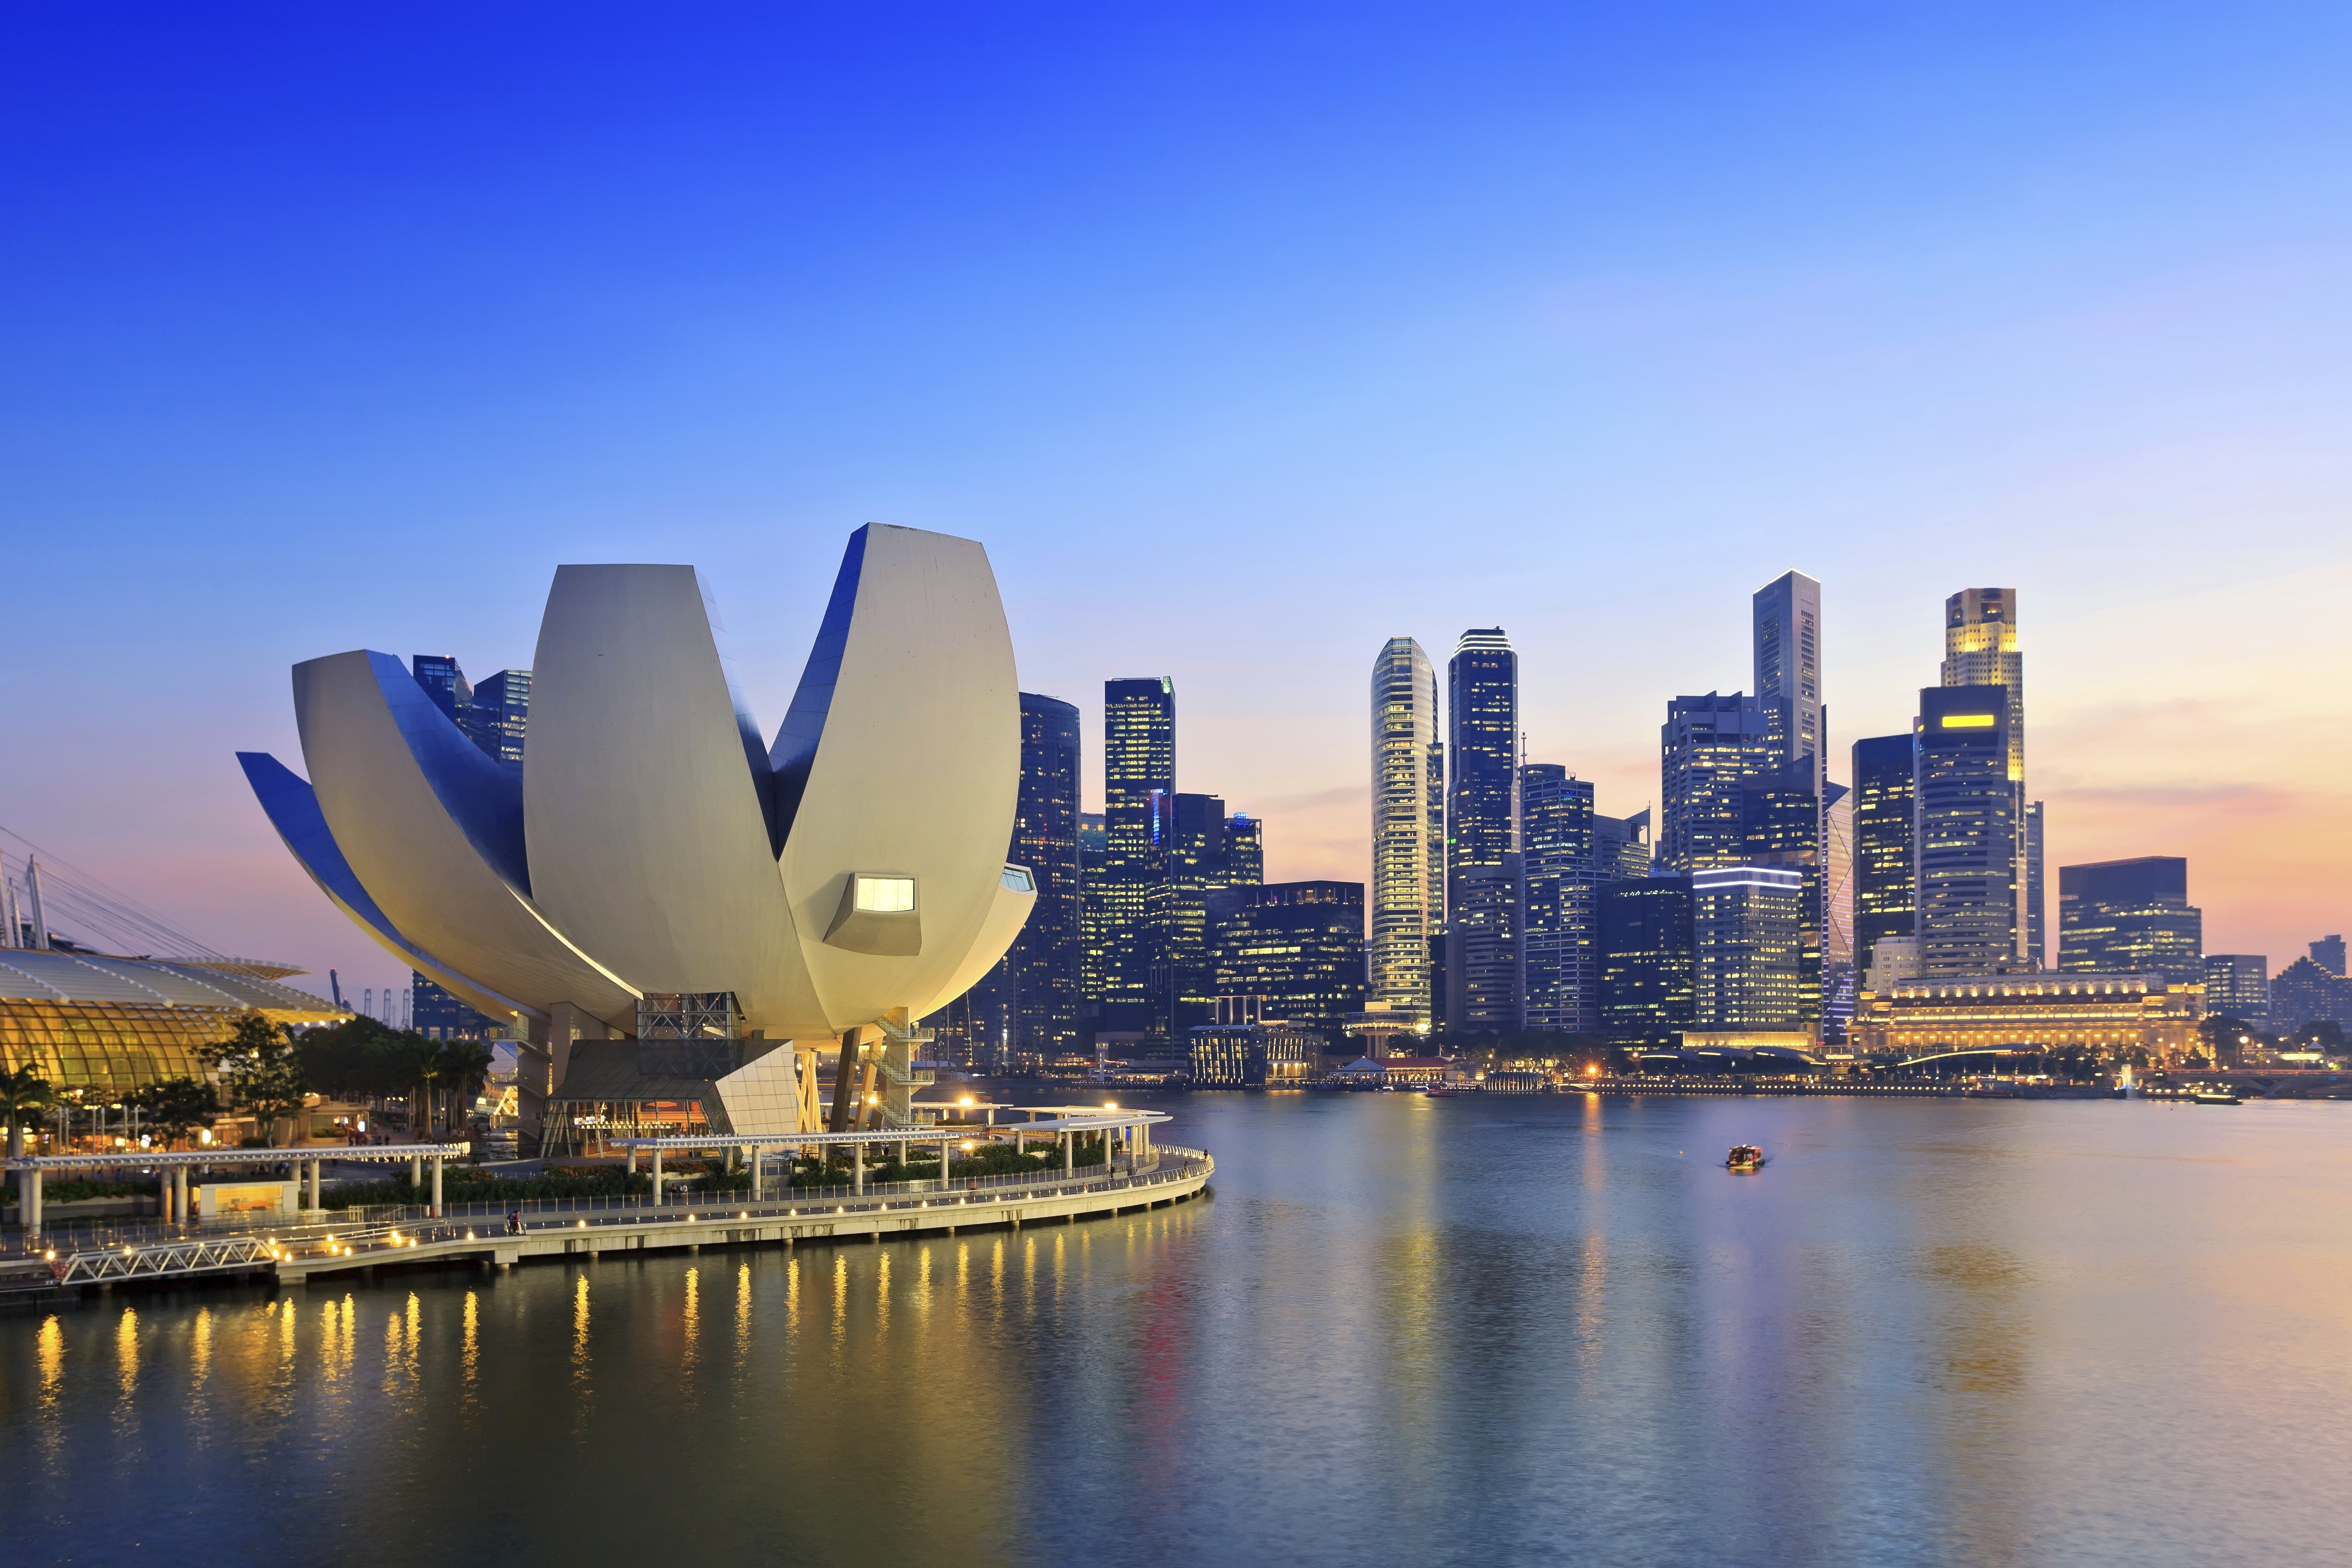 Singapore is one of the five luxury property markets set to rise in 2017.